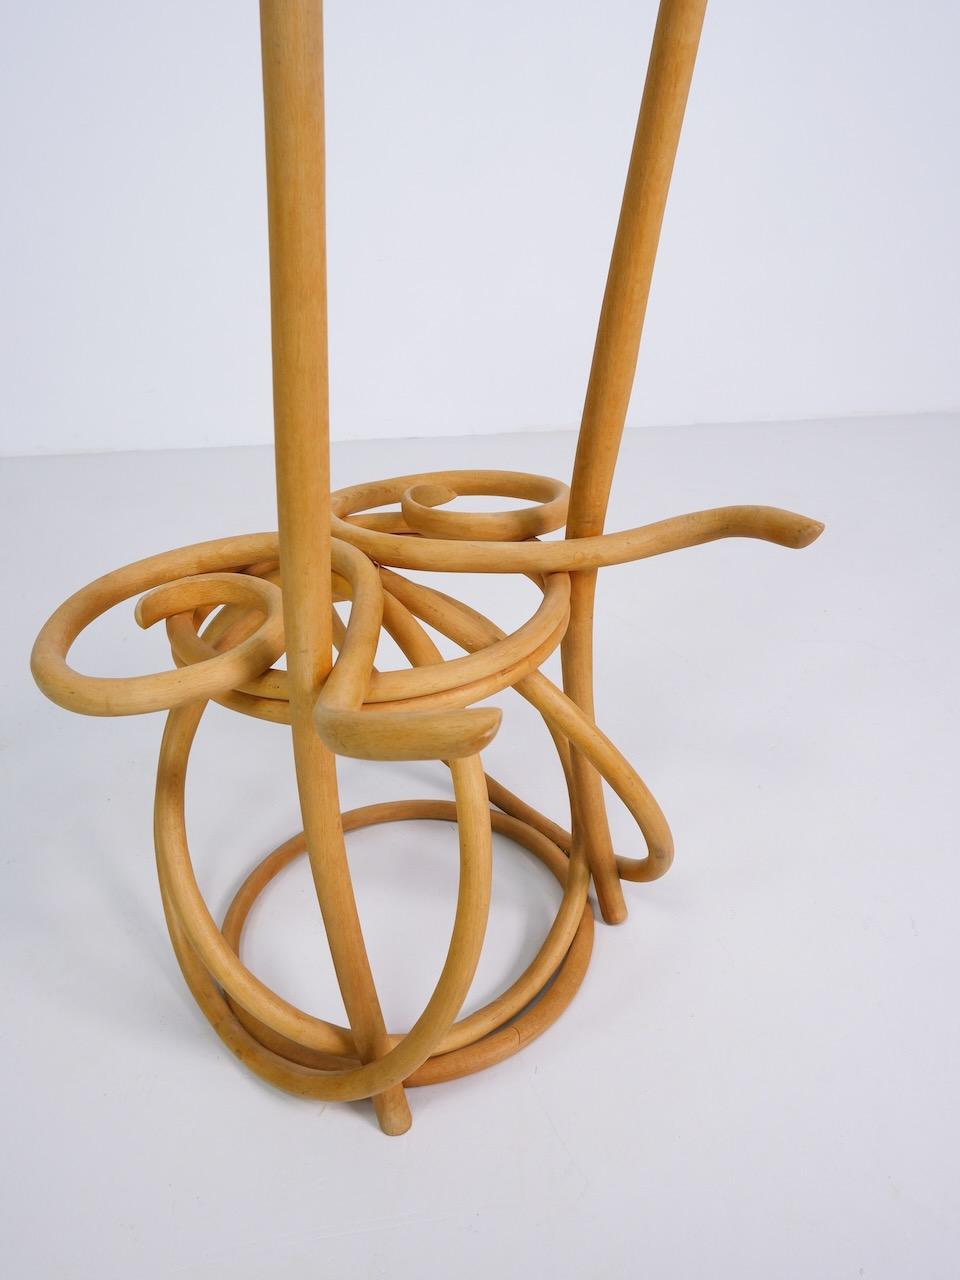 Bentwood 'Chair of the Rings' Chair by Martino Gamper for Thonet / Conran In Good Condition For Sale In Surbiton, GB